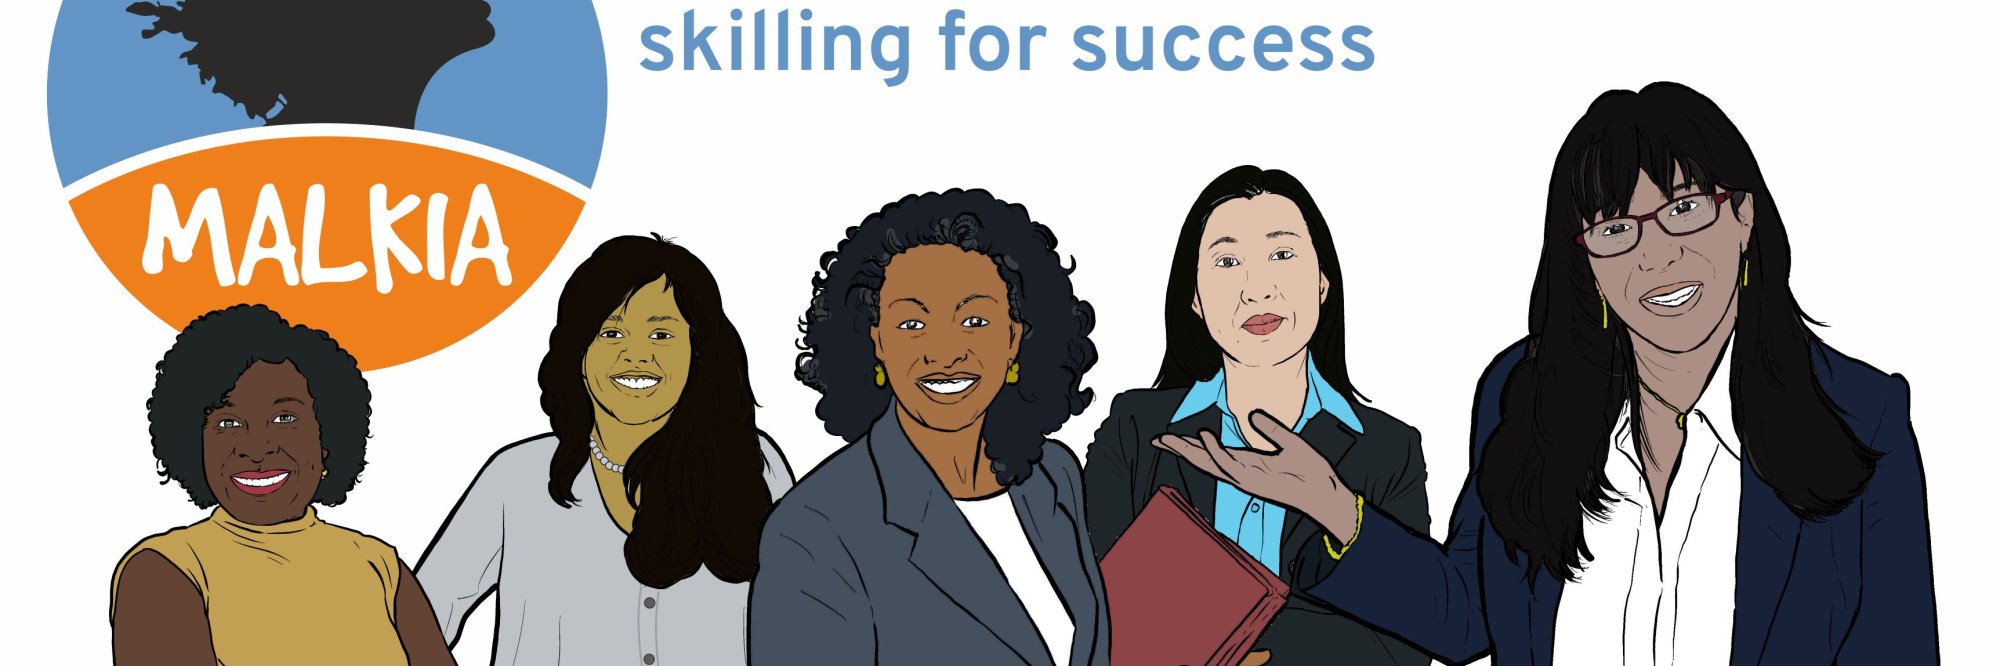 Malkia - Women managers rise up: skilling for success